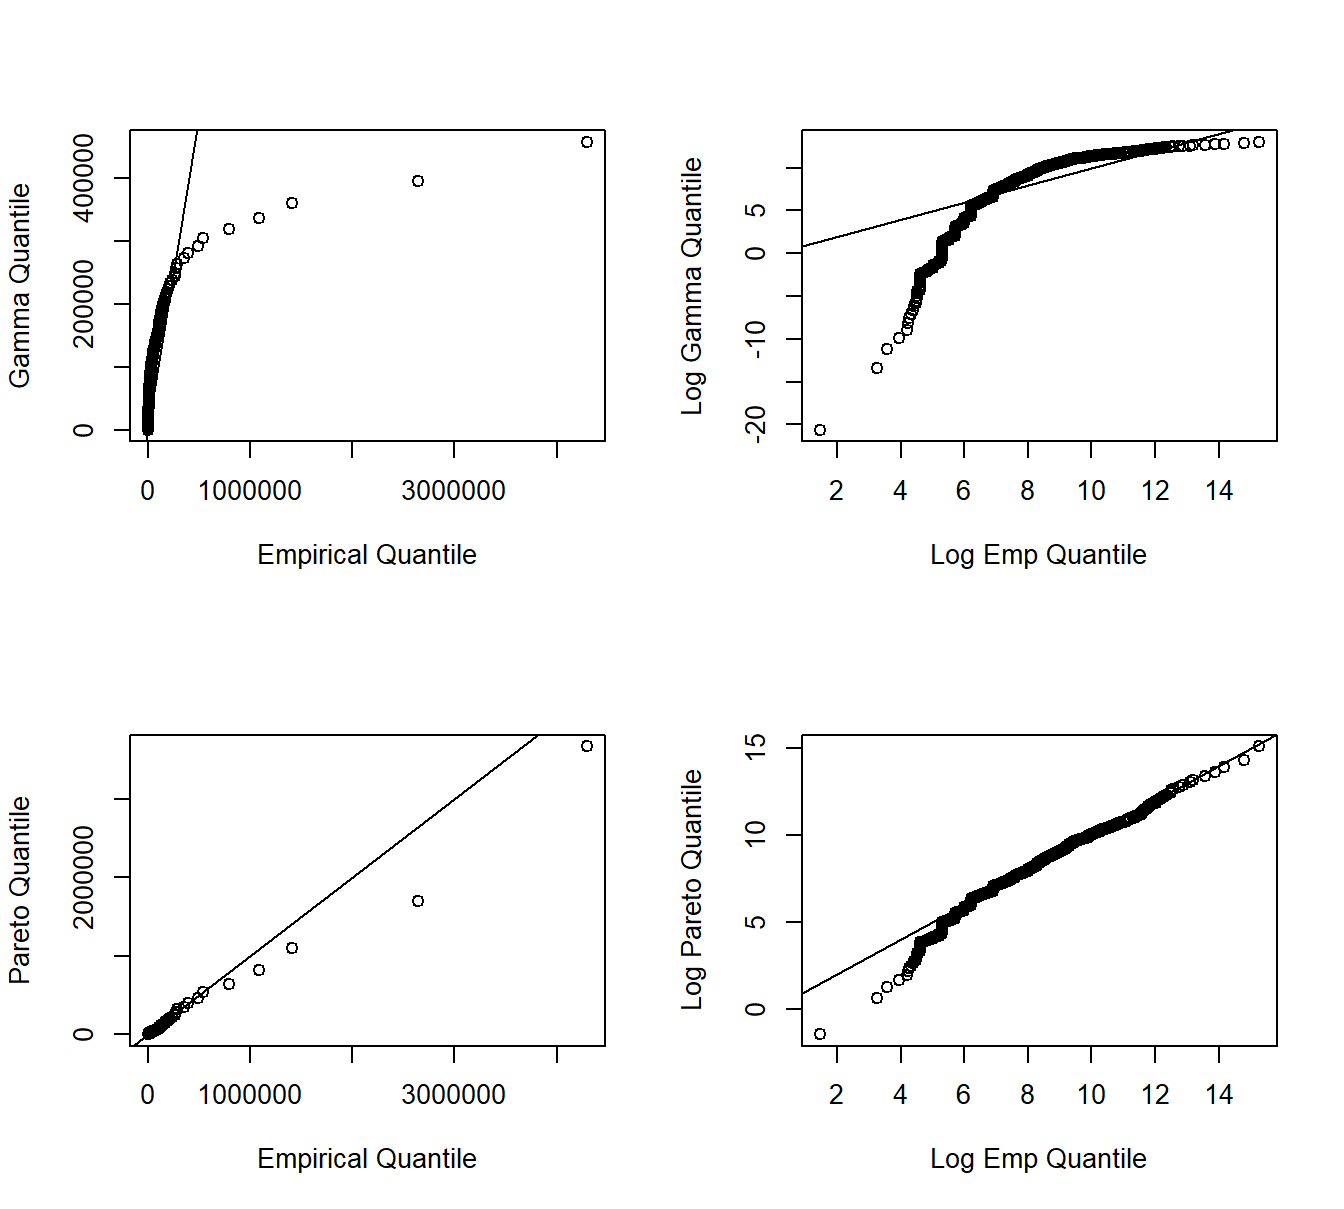 Quantile-Quantile ($qq$) Plots. The horizontal axes gives the empirical quantiles at each observation. The right-hand panels they are graphed on a logarithmic basis. The vertical axis gives the quantiles from the fitted distributions; gamma quantiles are in the upper panels, Pareto quantiles are in the lower panels.